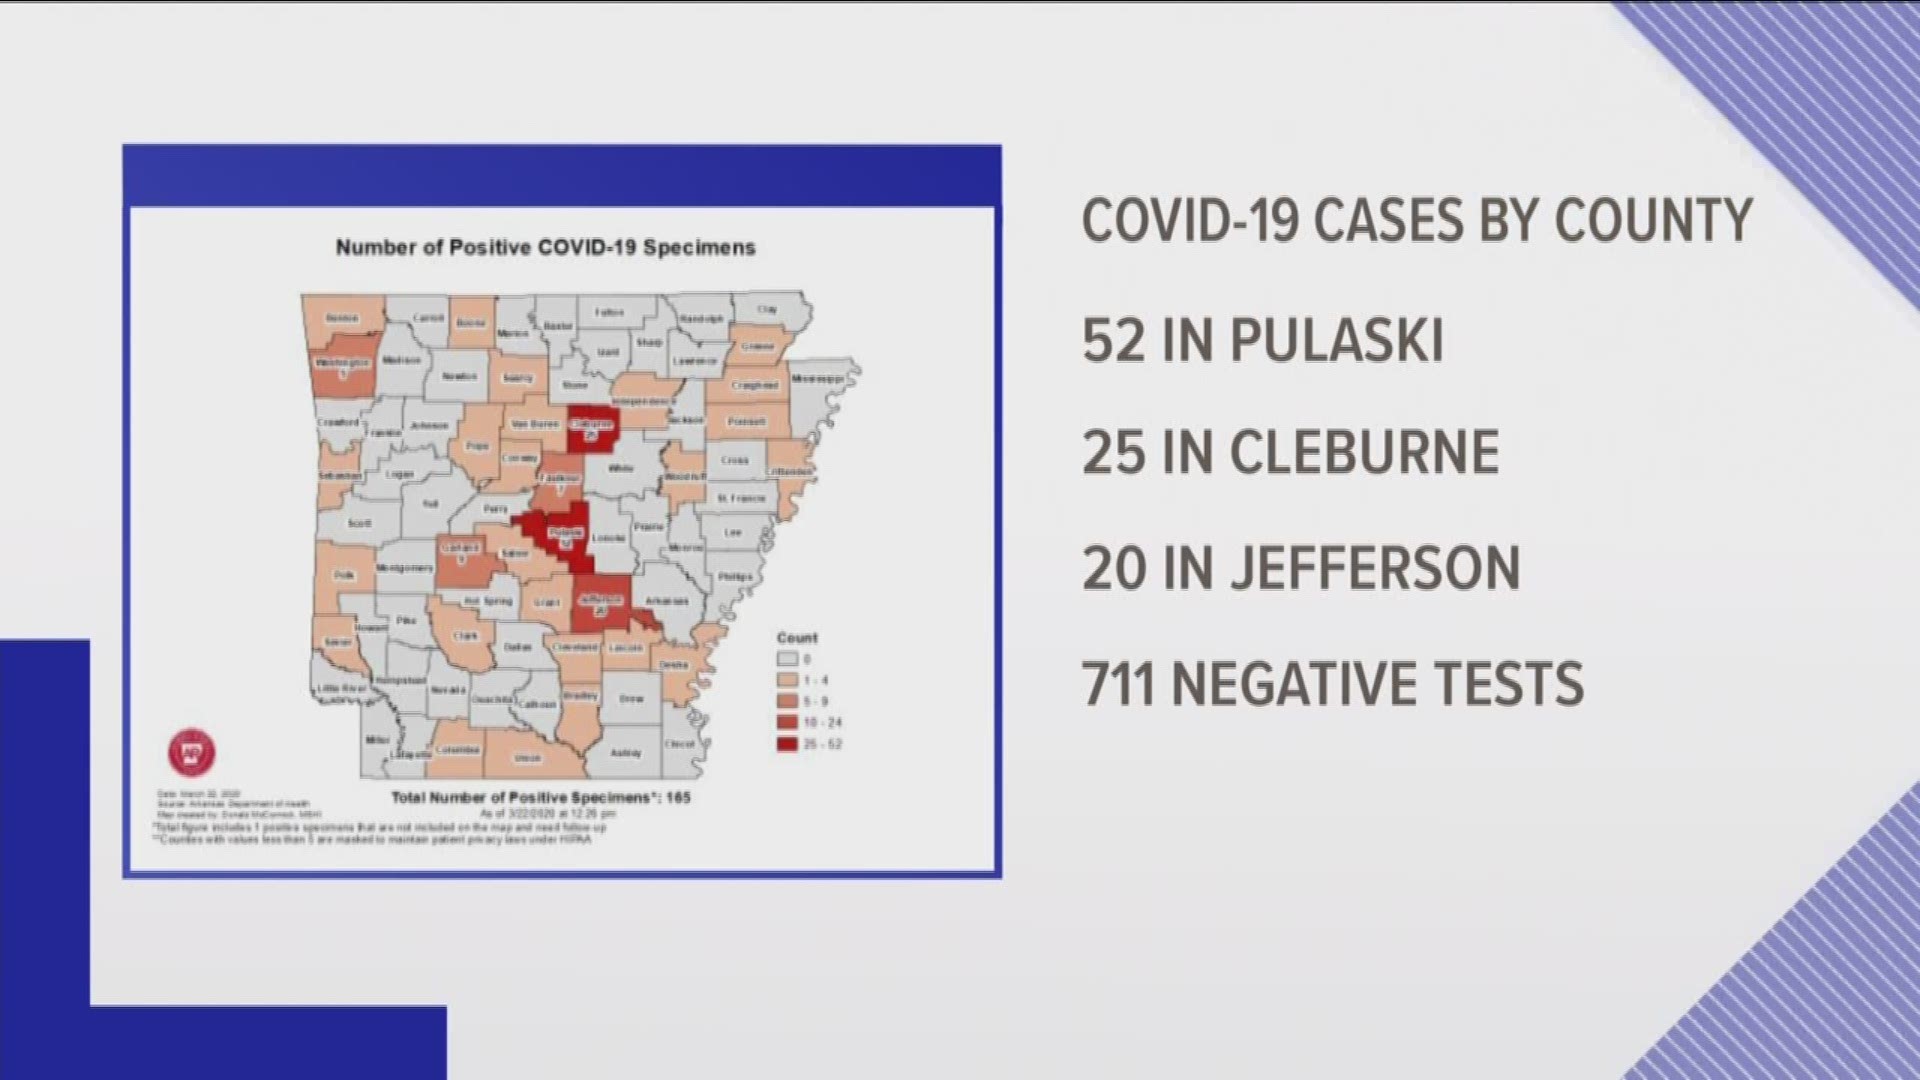 Real-time updates: 165 positive COVID-19 cases in Arkansas, over 700 negative tests